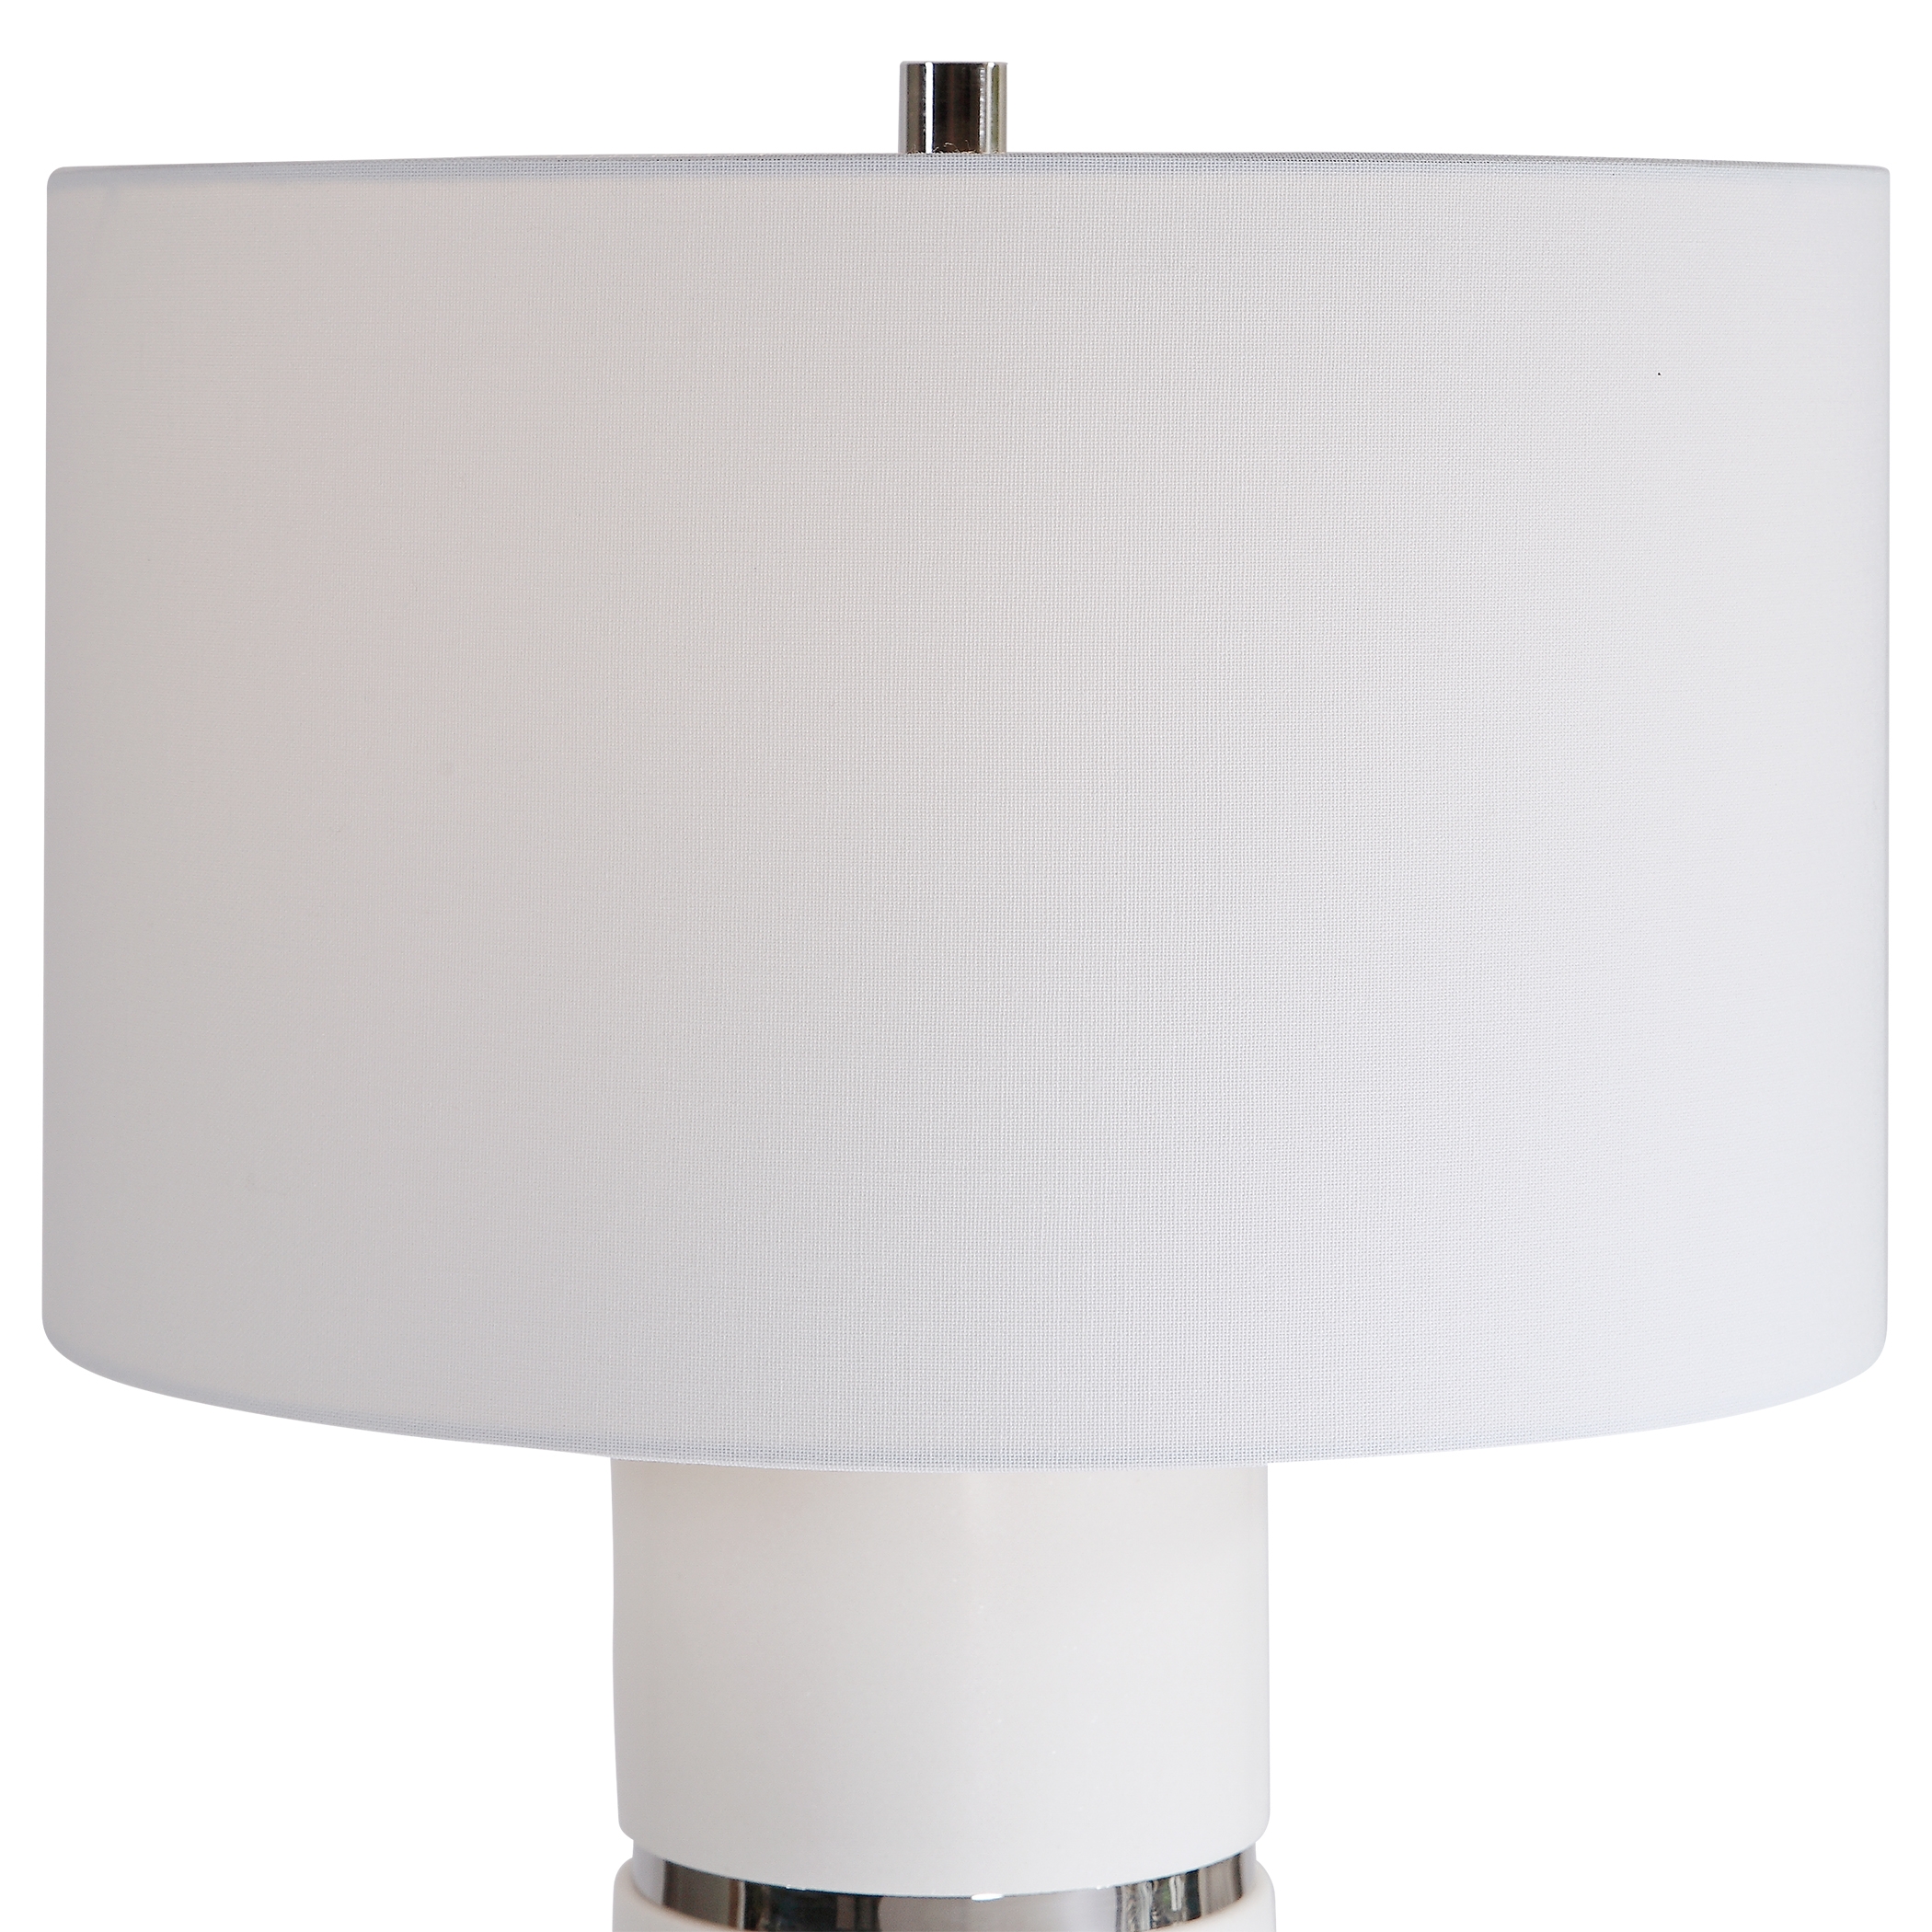 Grania White Marble Table Lamp - Image 3